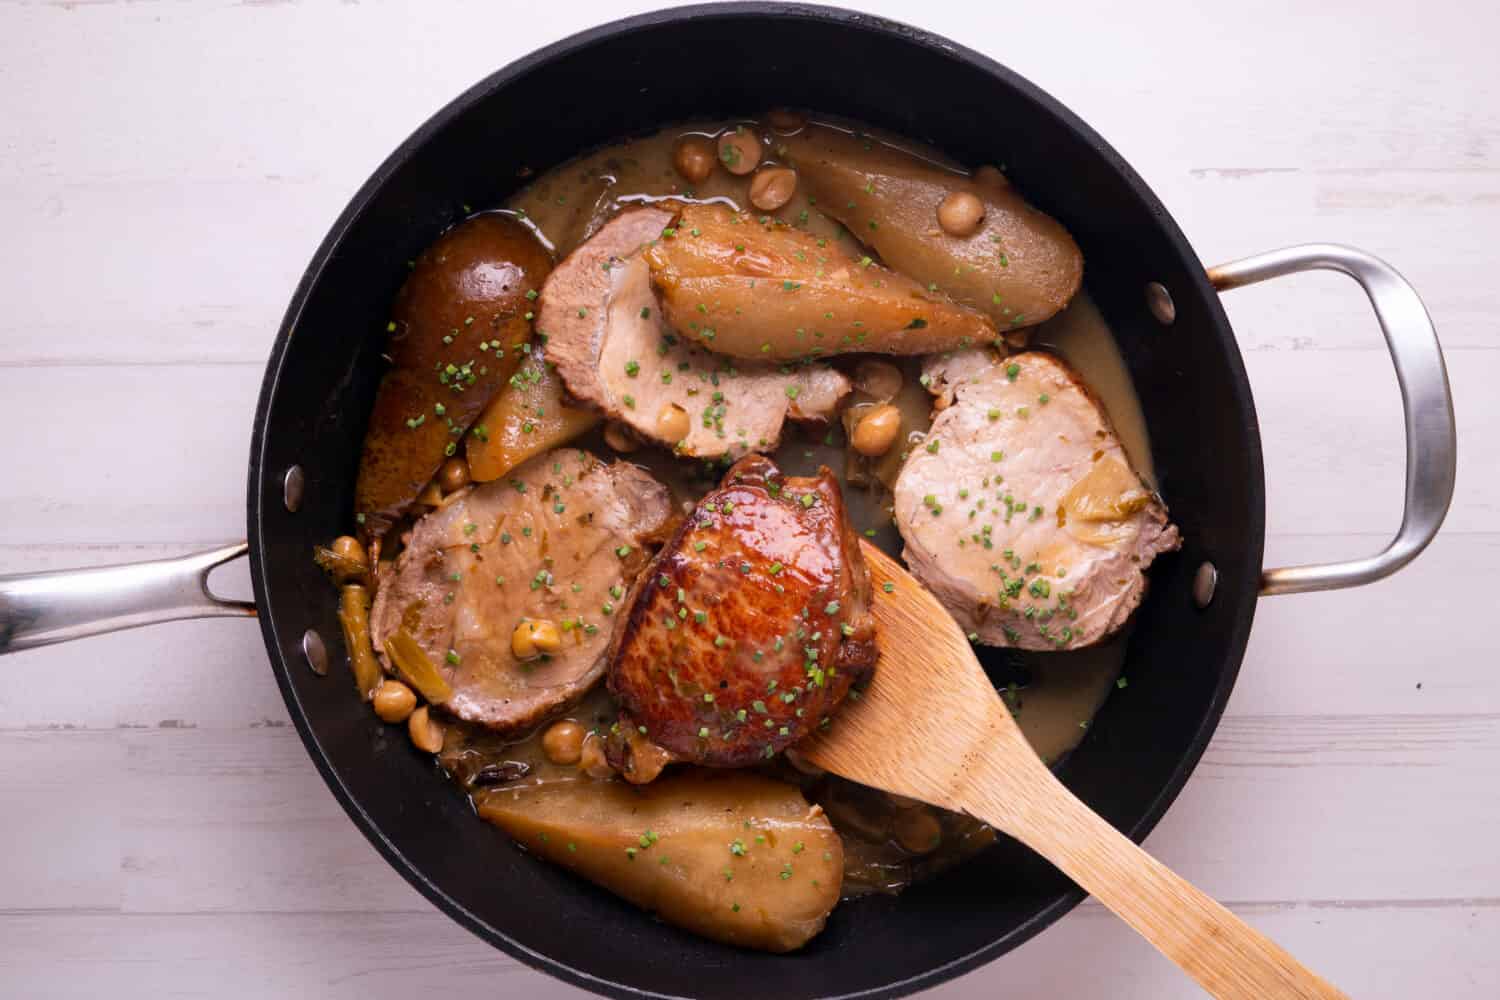 Pork loin cooked with pears and hazelnuts. Traditional Spanish tapa.